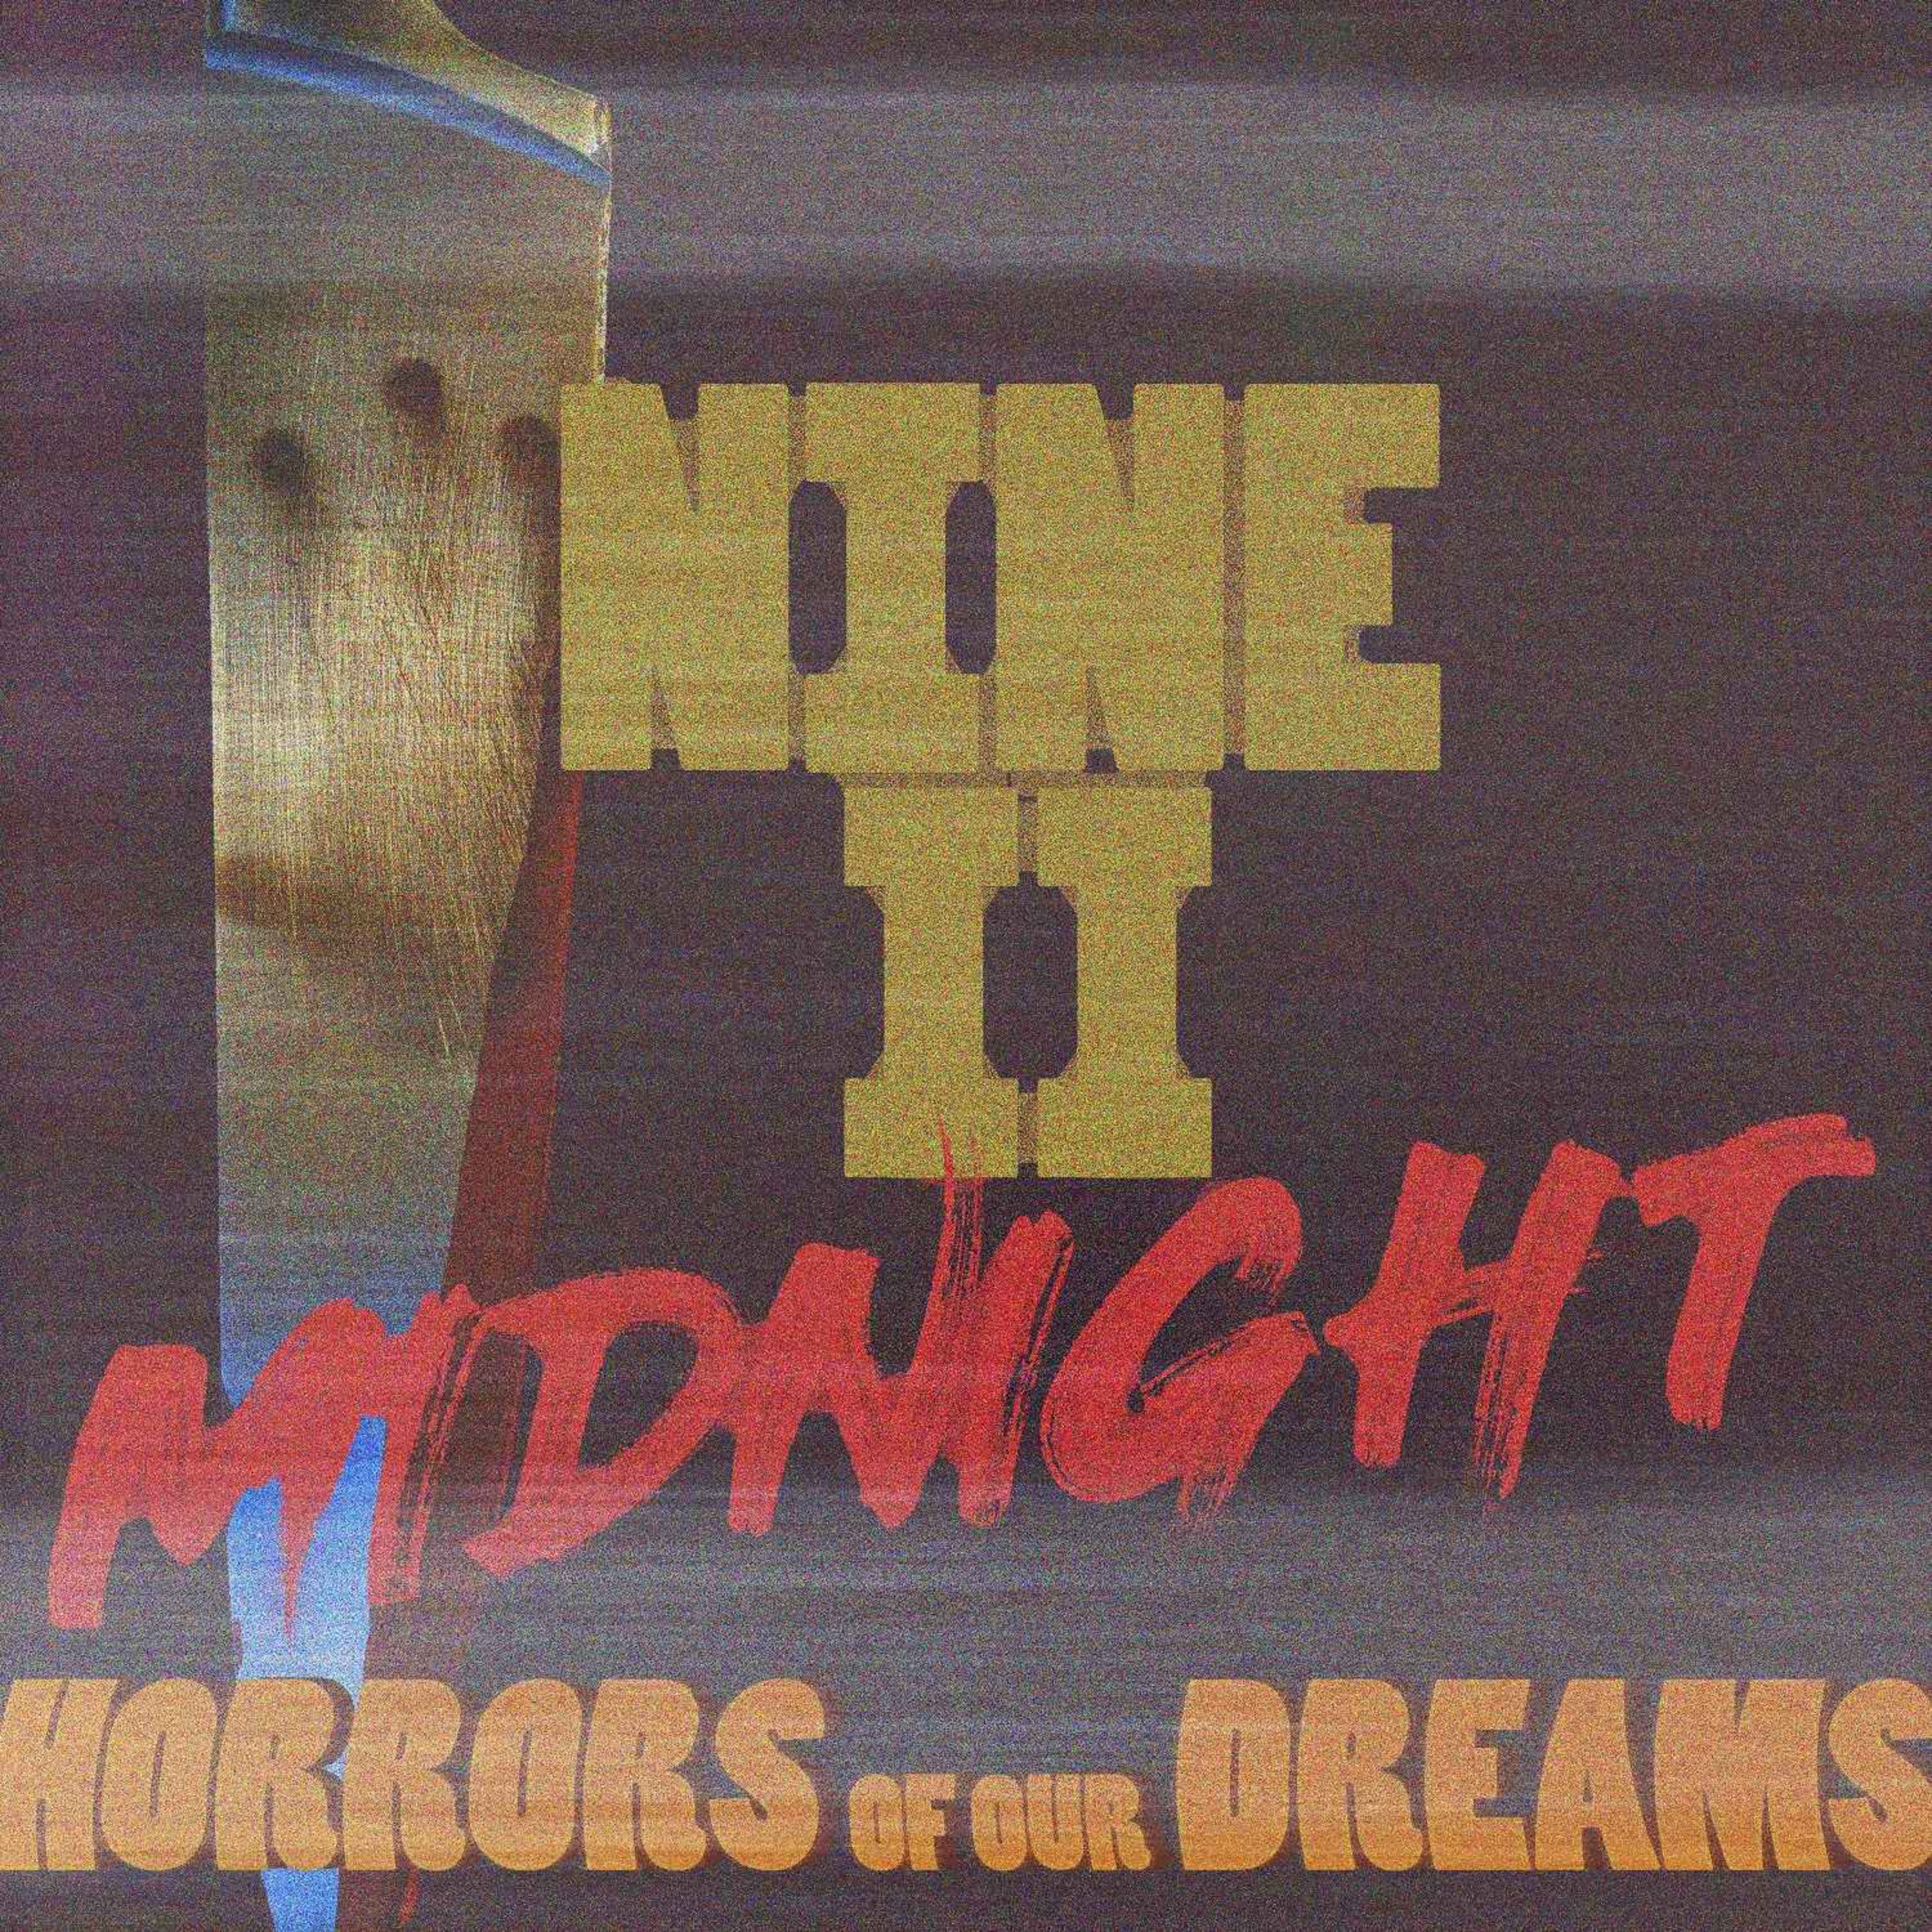 cover art for NINE II MIDNIGHT - Horrors Of Our Dreams